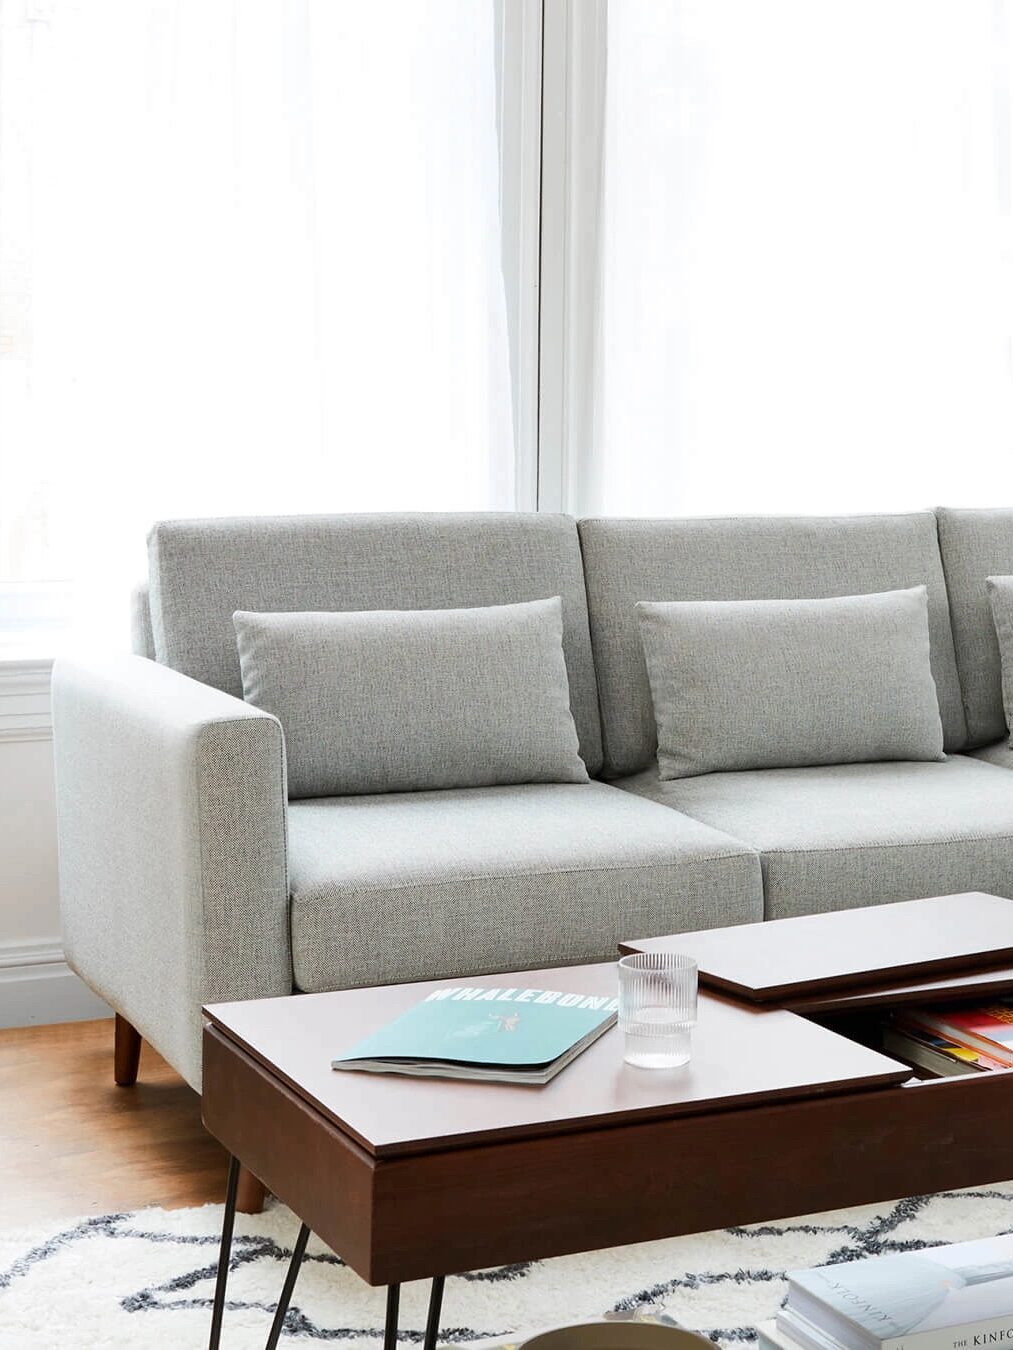 A light grey burrow couch in a living room setting. 